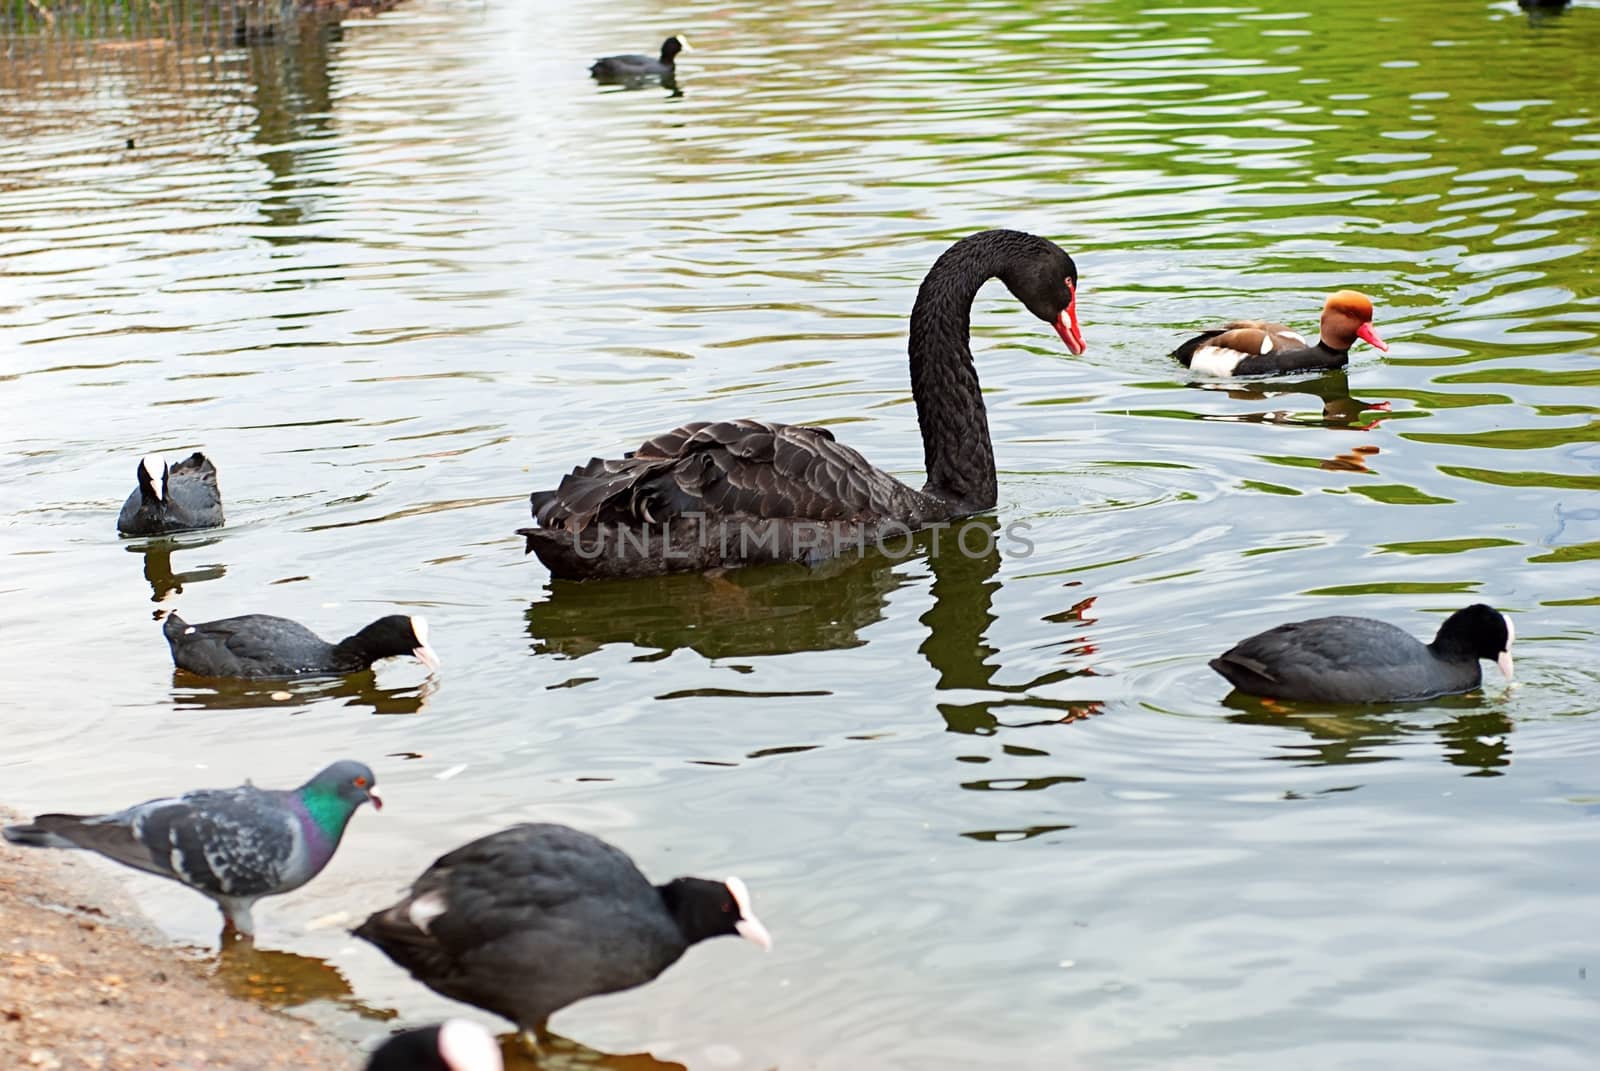 A black swan swimming on a pool of green water by mitakag